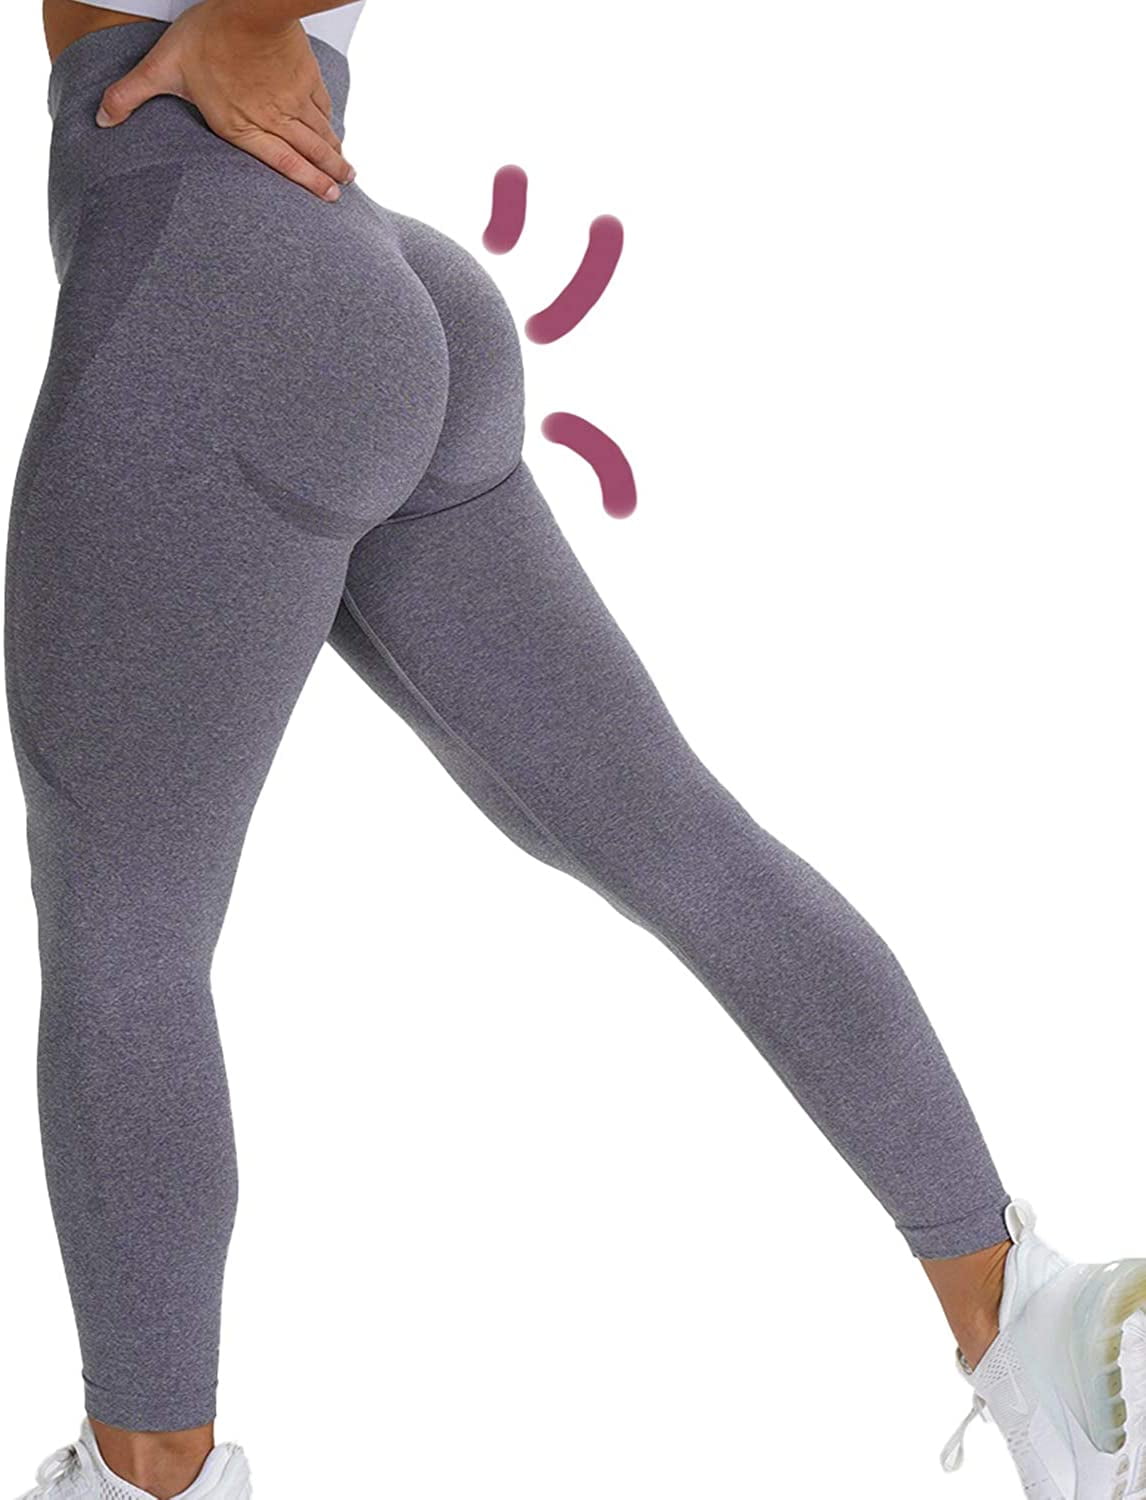 High Waist Leggings Women Fitness Workout Clothing for Women Gym Clothing Push  Up Leggings Butt Lift Seamless Yoga Pants – the best products in the Joom  Geek online store